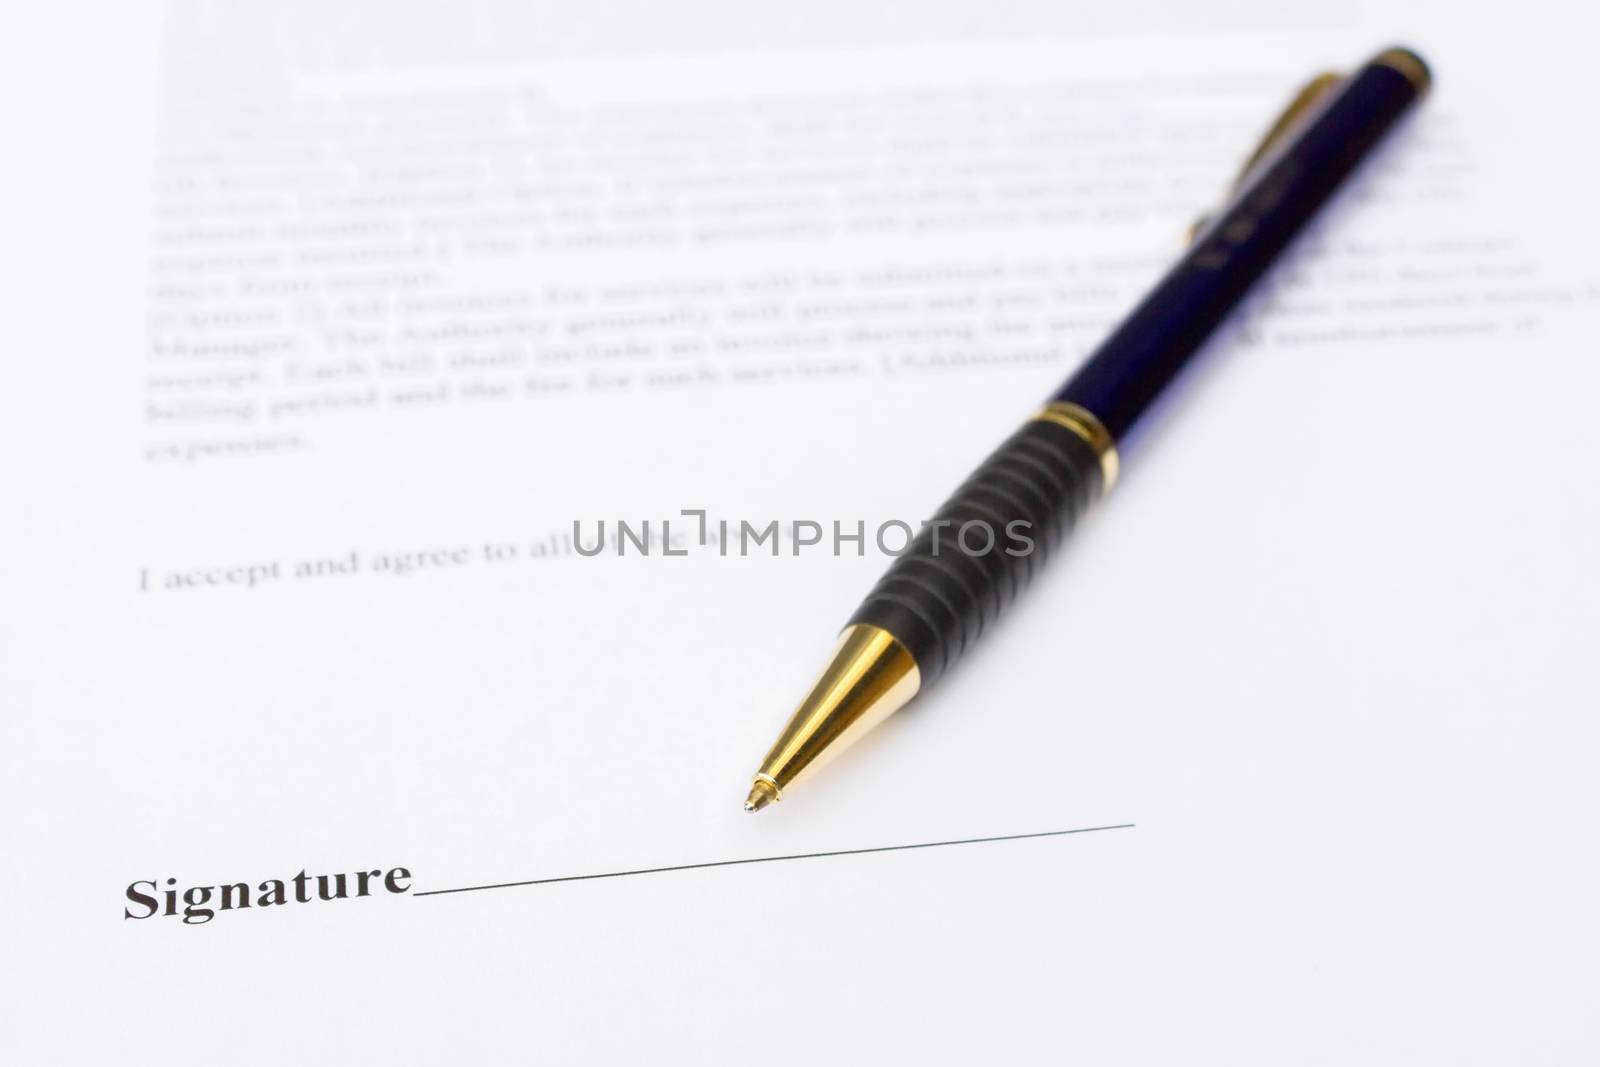 Pen for signature lying on contract by BenSchonewille